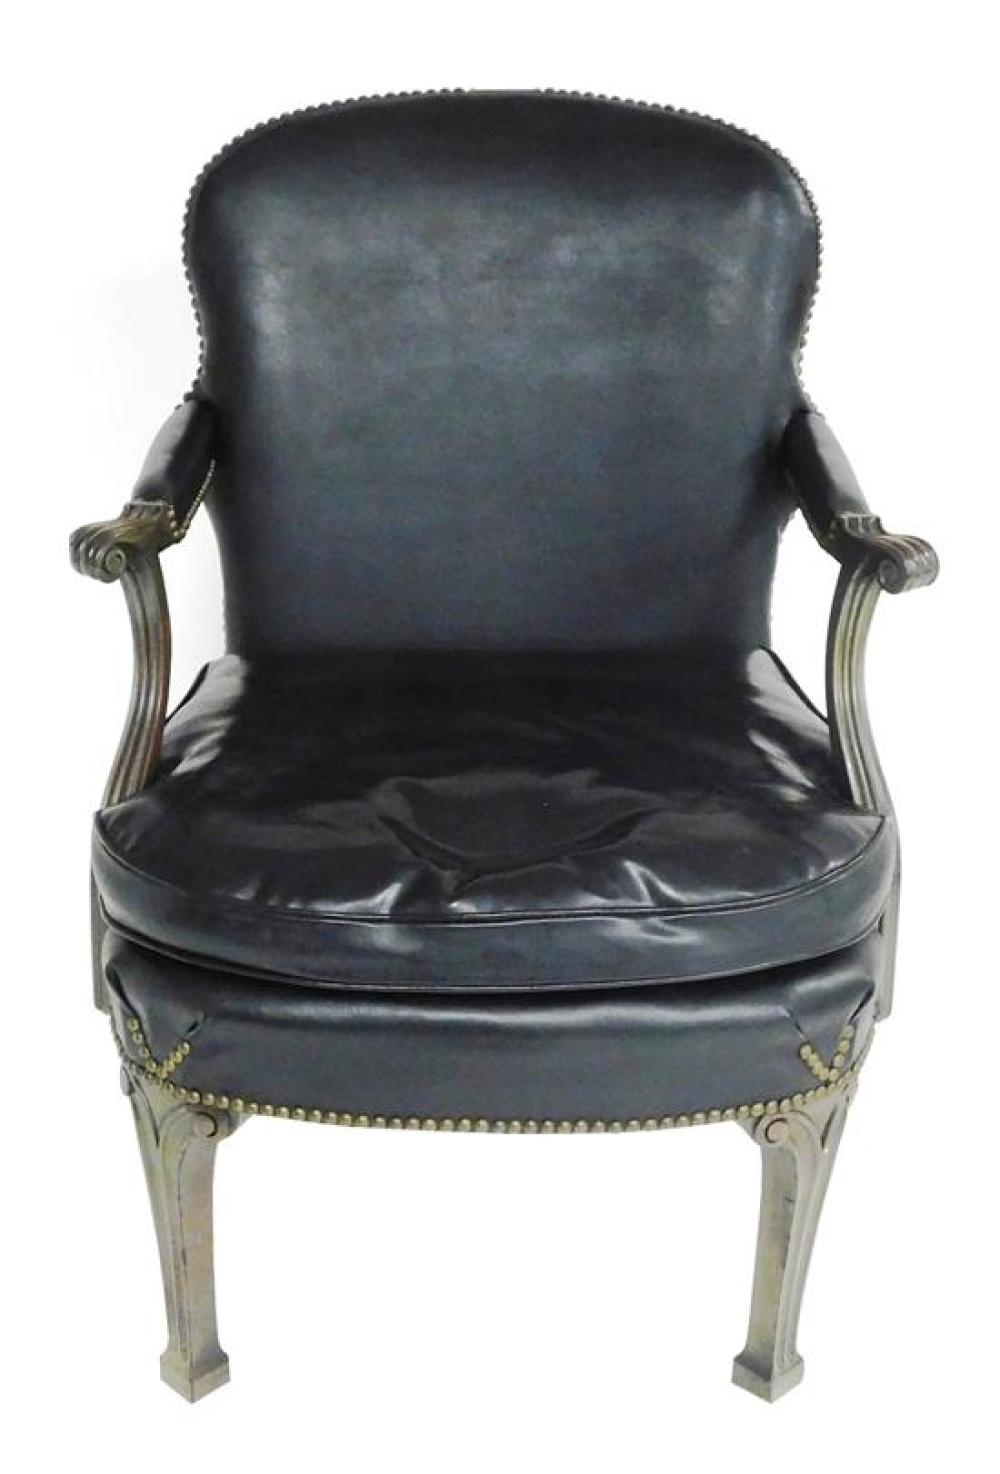 ENGLISH STYLE LIBRARY CHAIR BLACK 31cdc9